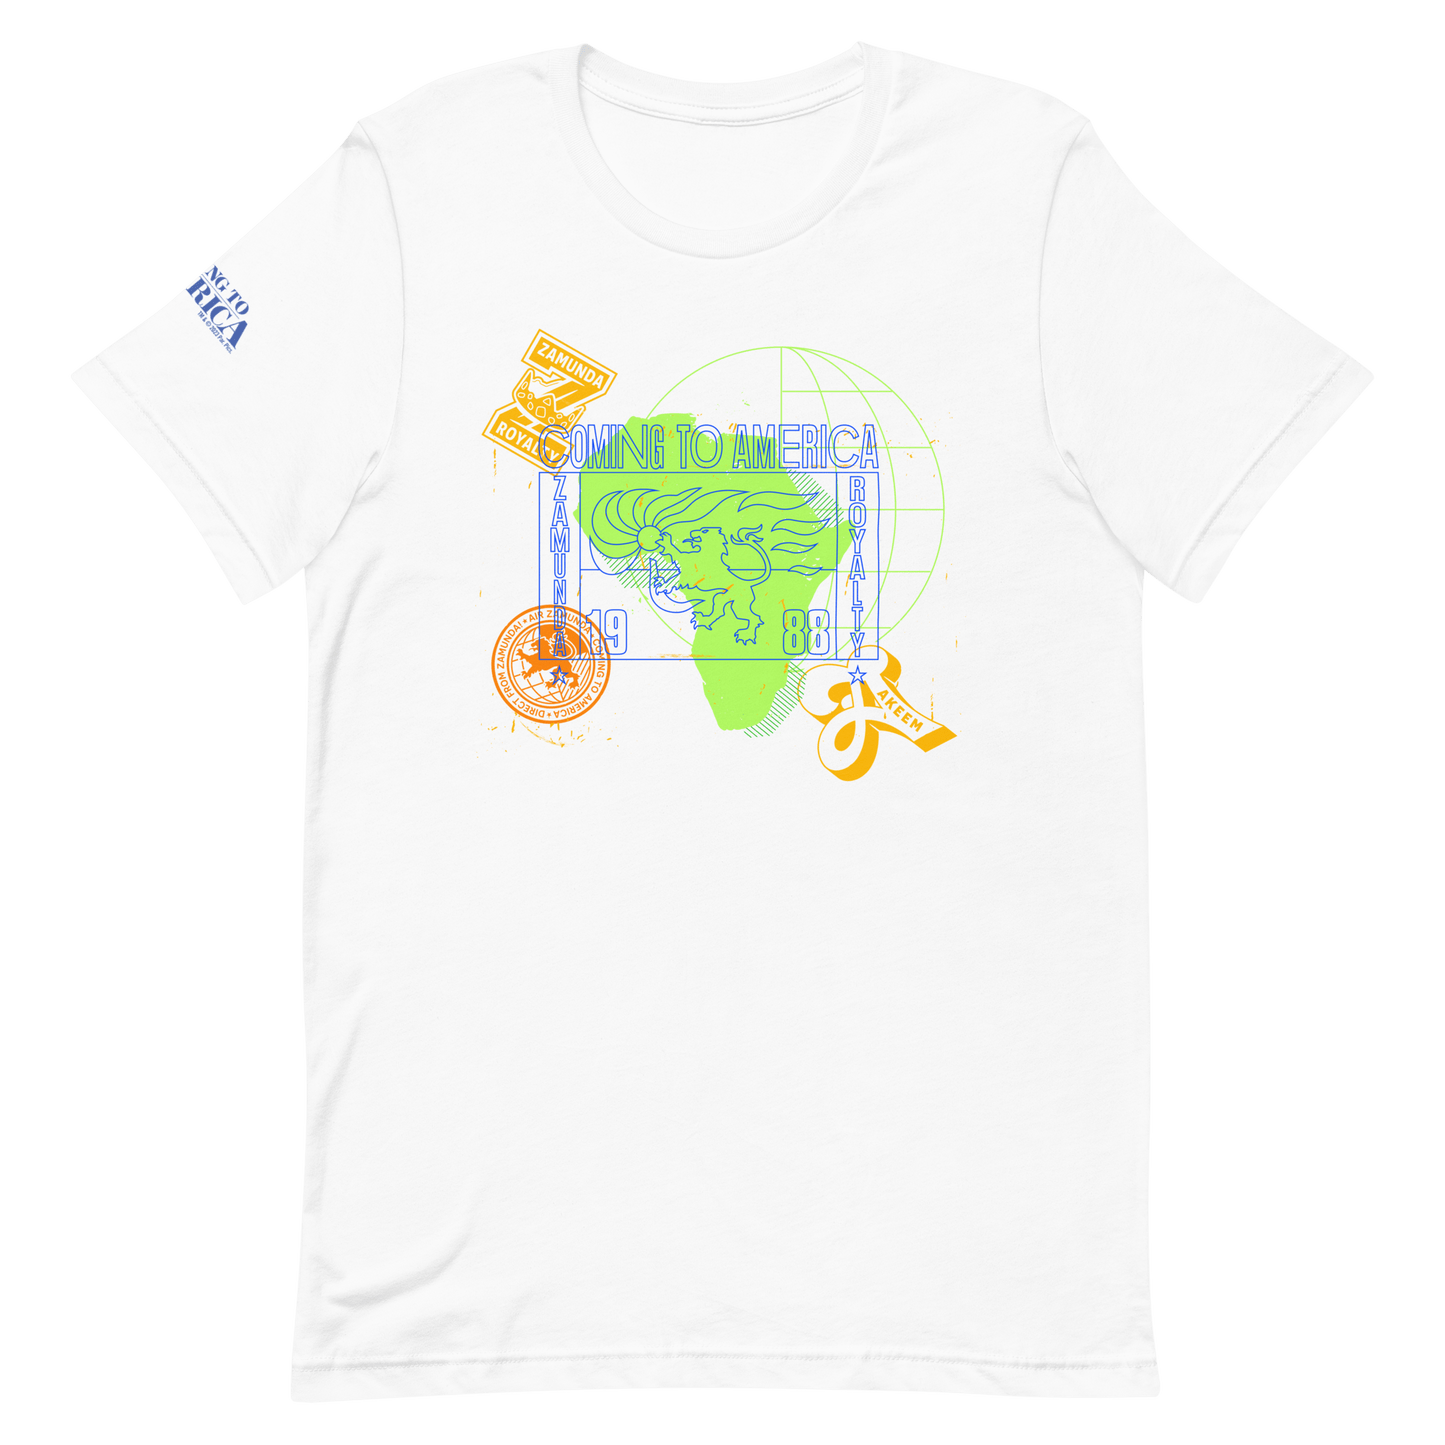 Coming To America Passport Stamp Adult Short Sleeve T - Shirt - Paramount Shop